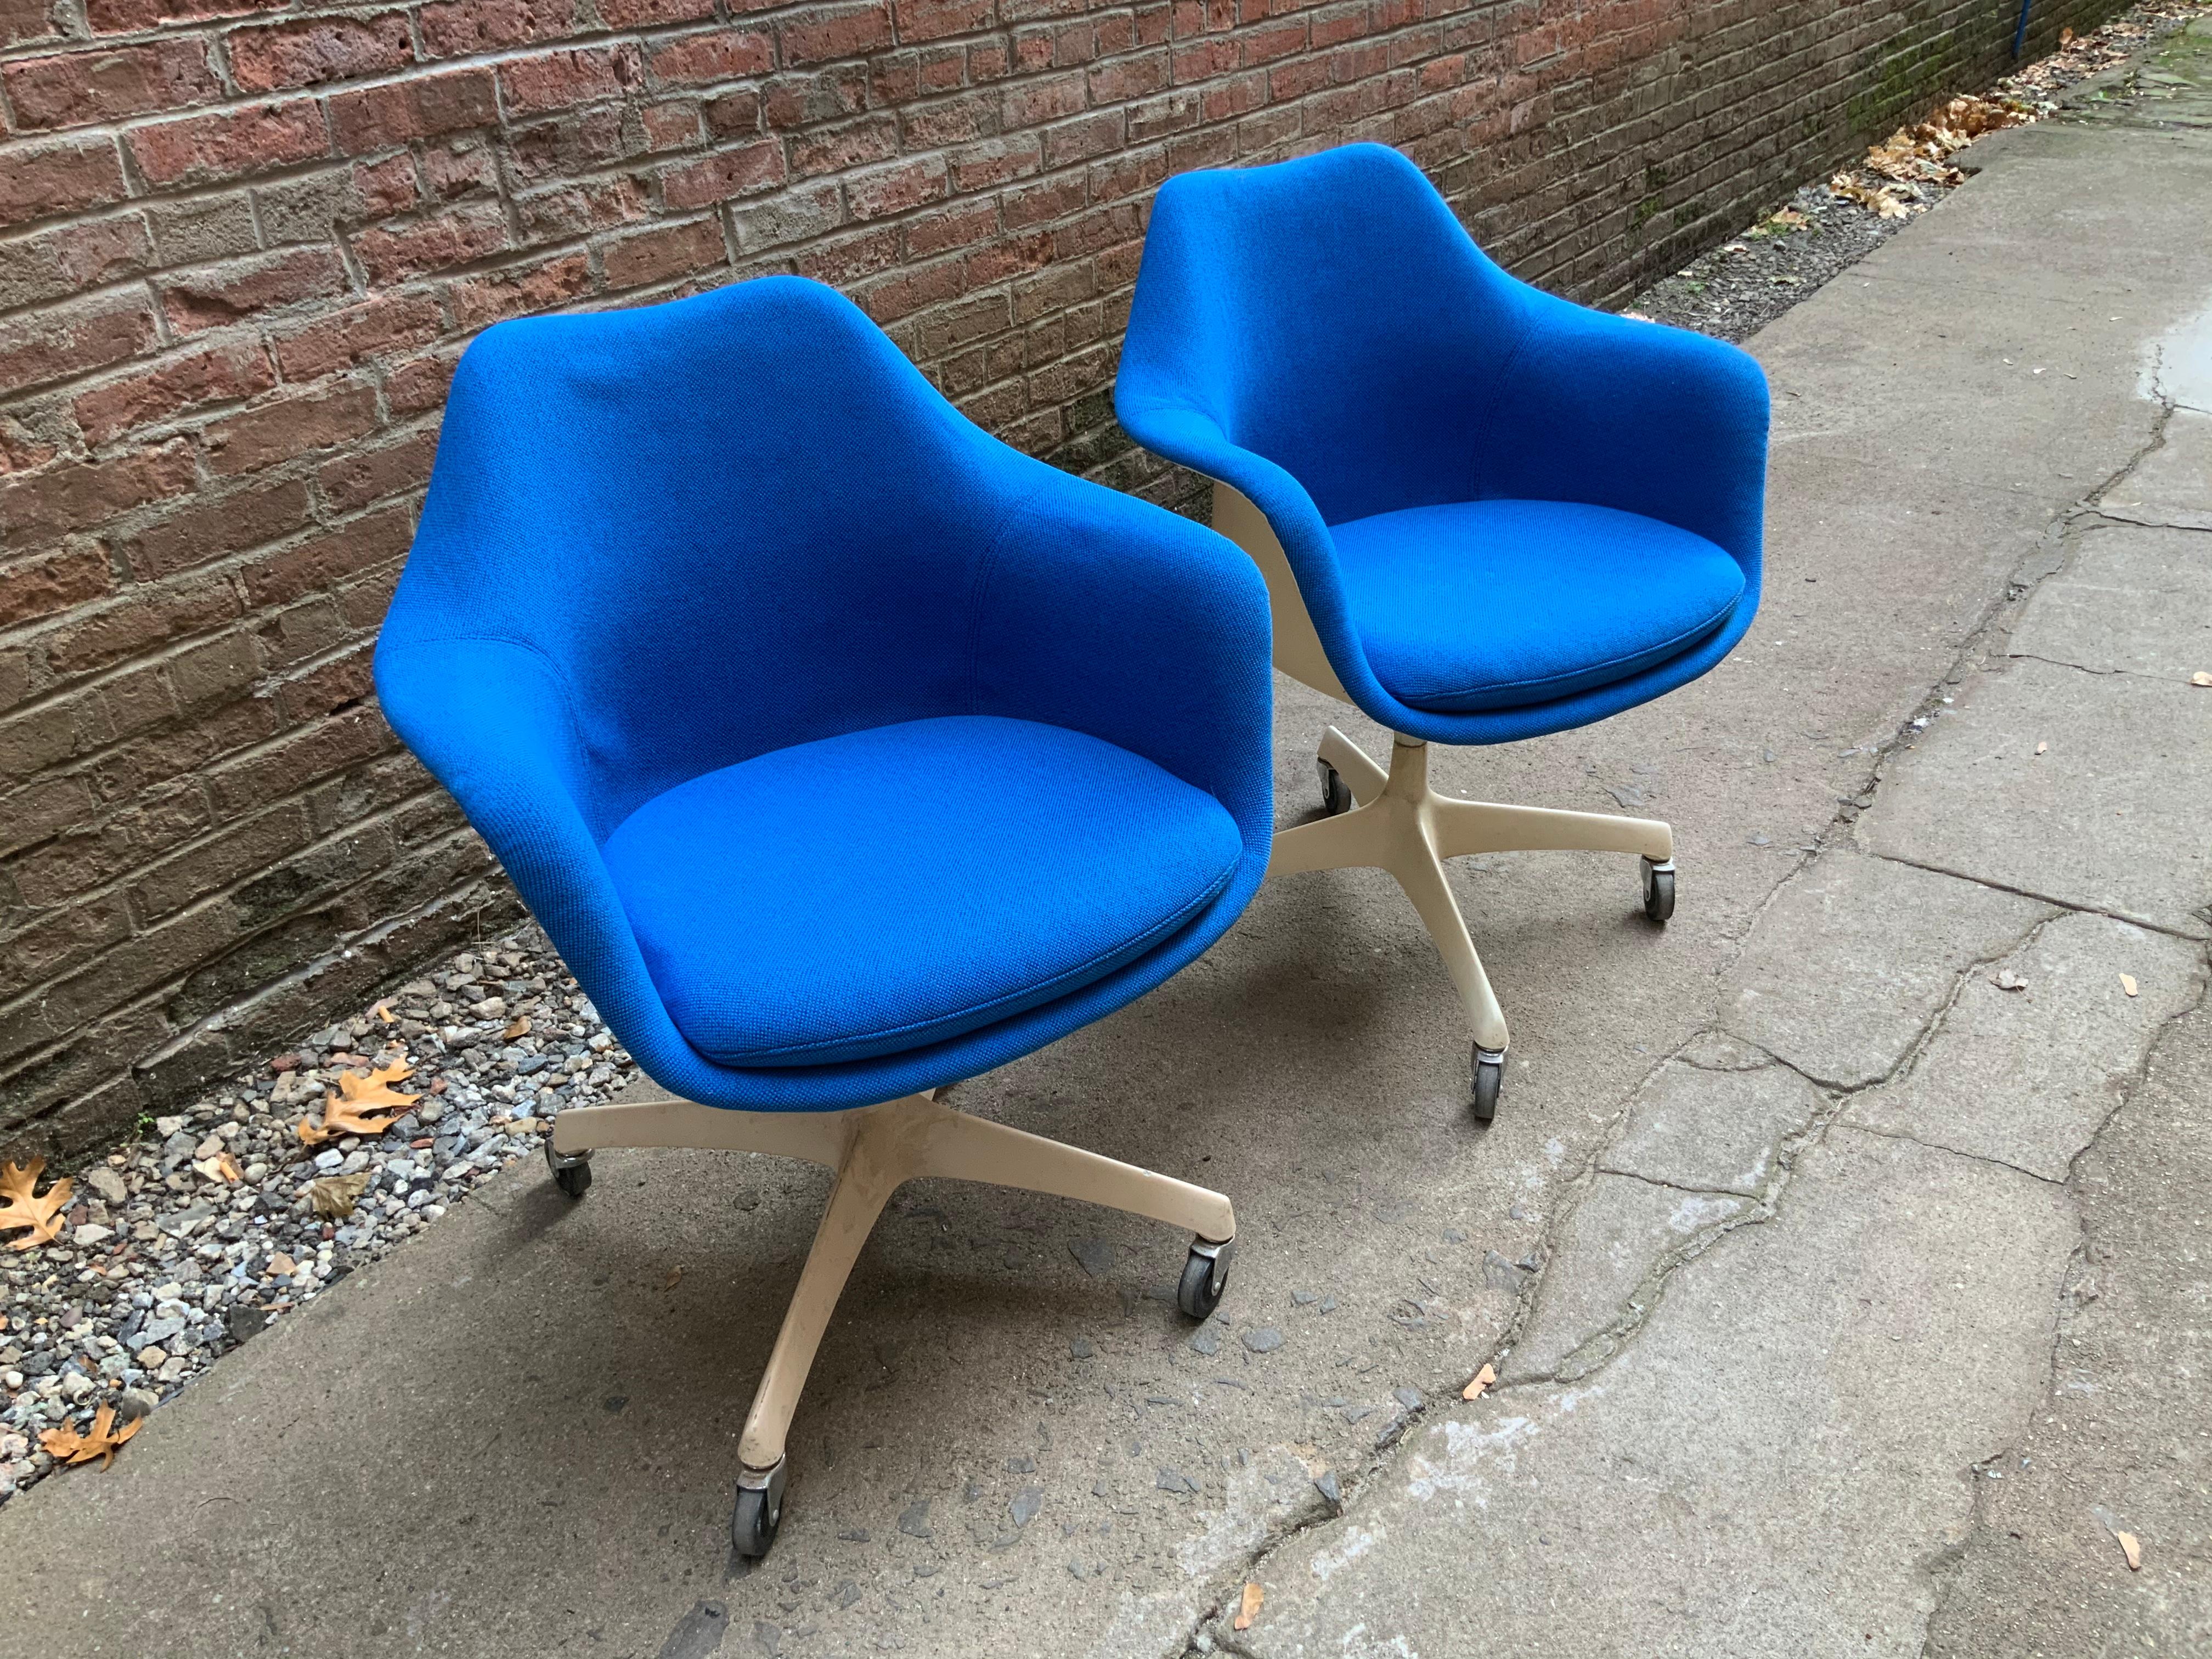 Eero Saarinen for Knoll Associates, New York. Re-upholstered in Knoll fabric. Aluminum swivel bases with upholstered interiors with exposed plastic exteriors. Original hard rubber wheels, circa 1960-1970. Signed, Knoll Associates.

Approximately